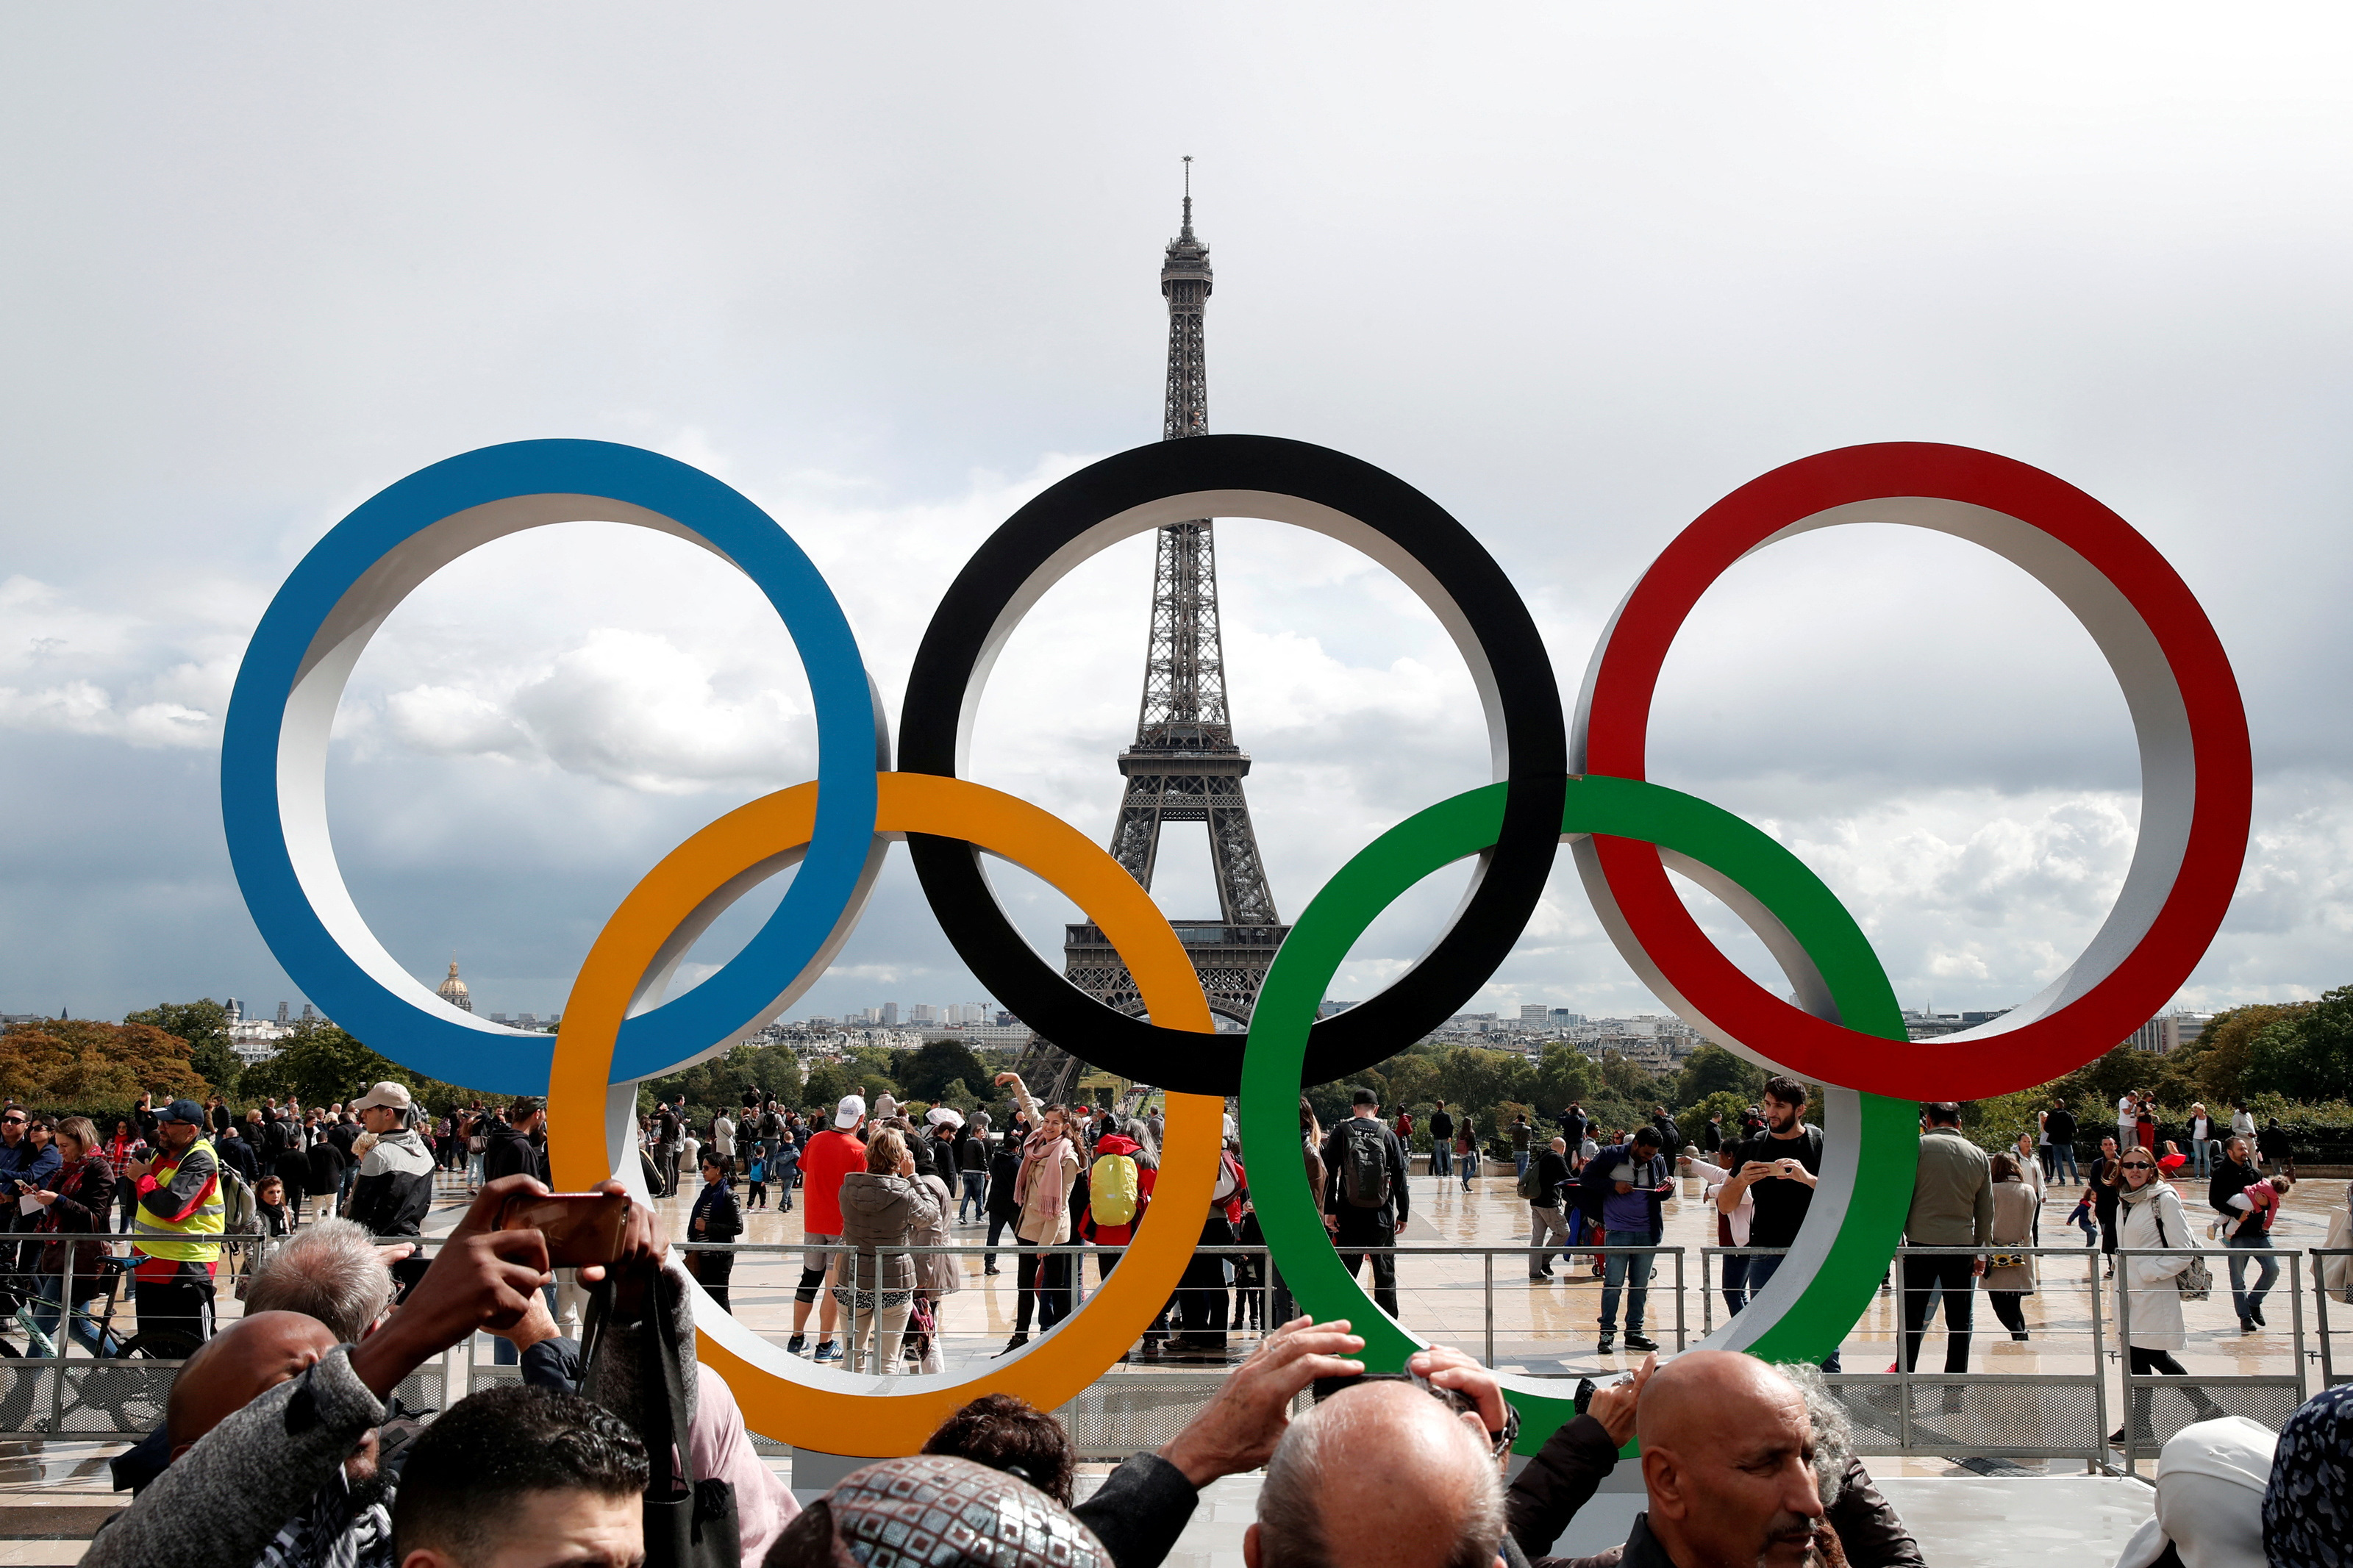 Olympic rings to celebrate the IOC official announcement that Paris won the 2024 Olympic bid are seen in front of the Eiffel Tower at the Trocadero square in Paris